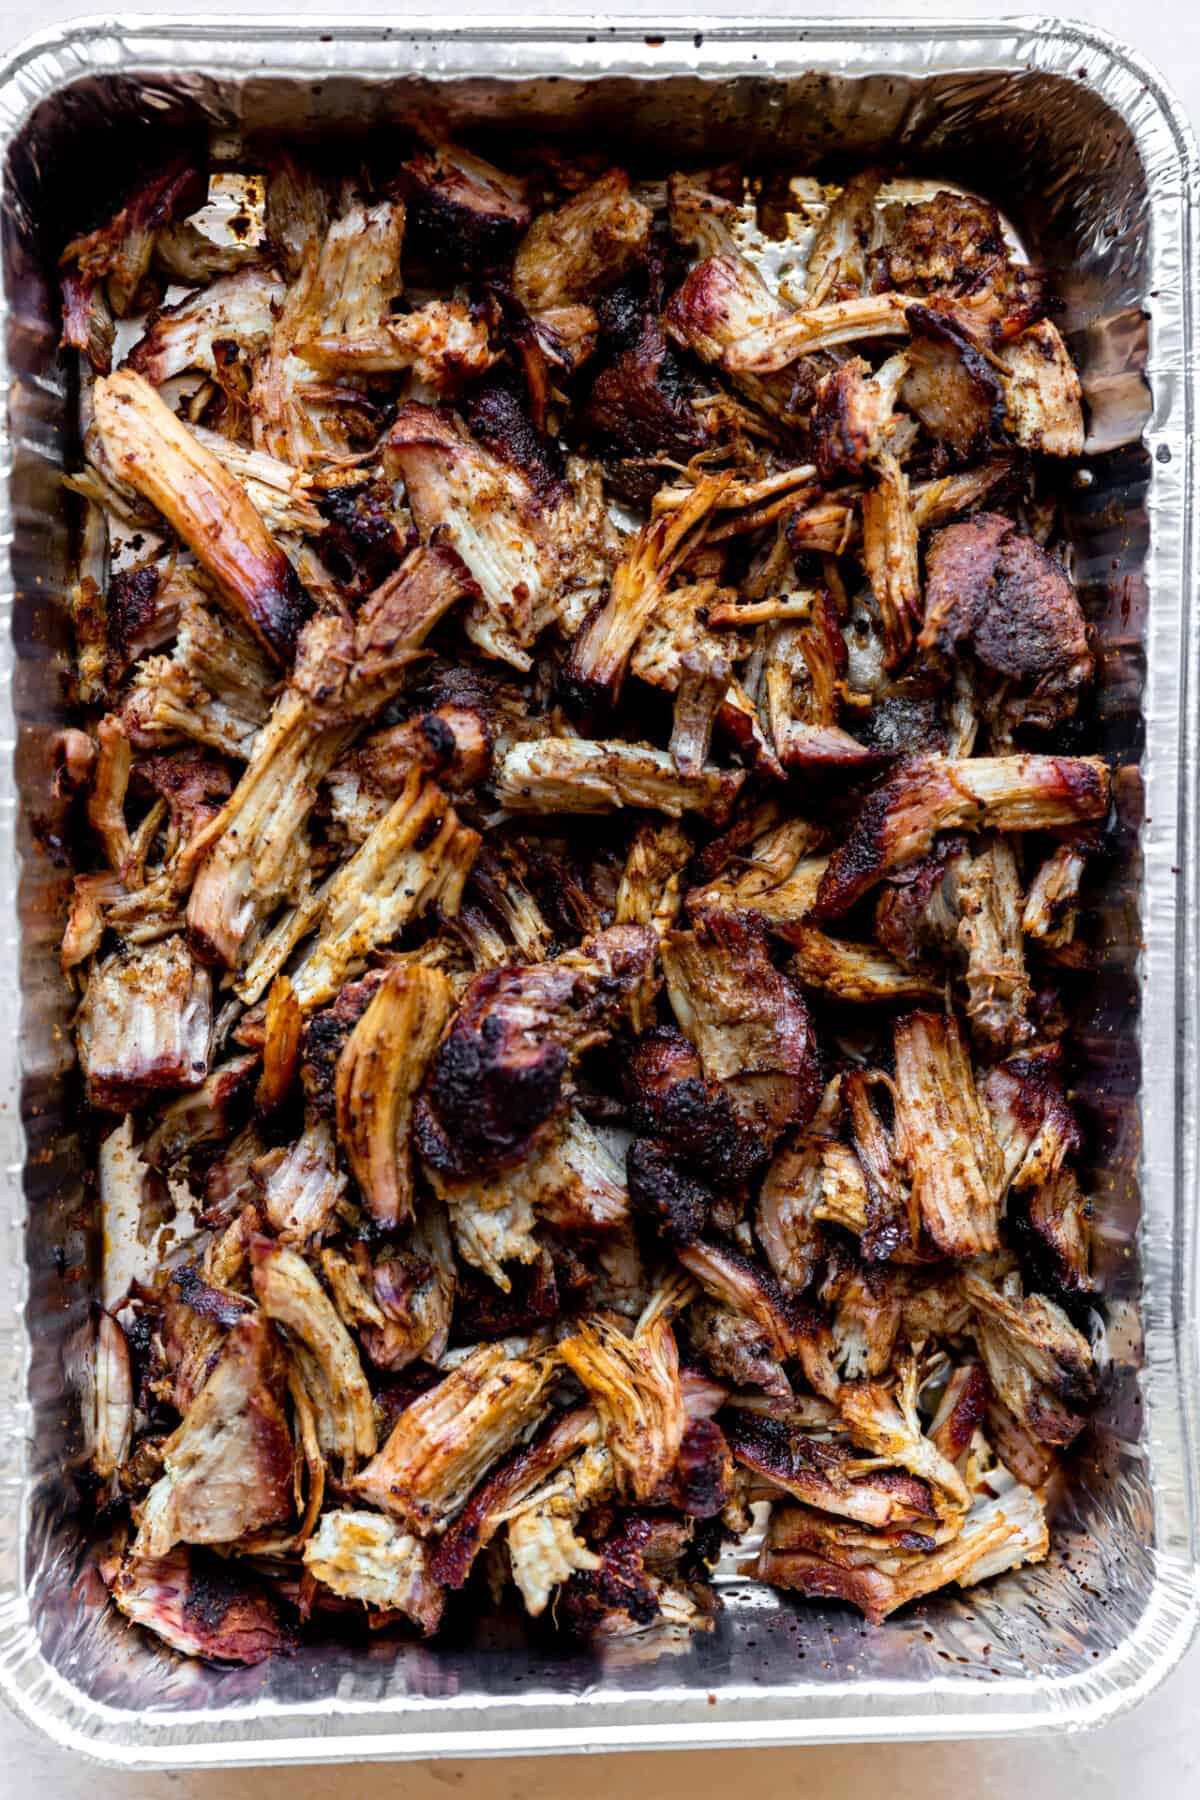 Shredded pork in a tin after smoking.